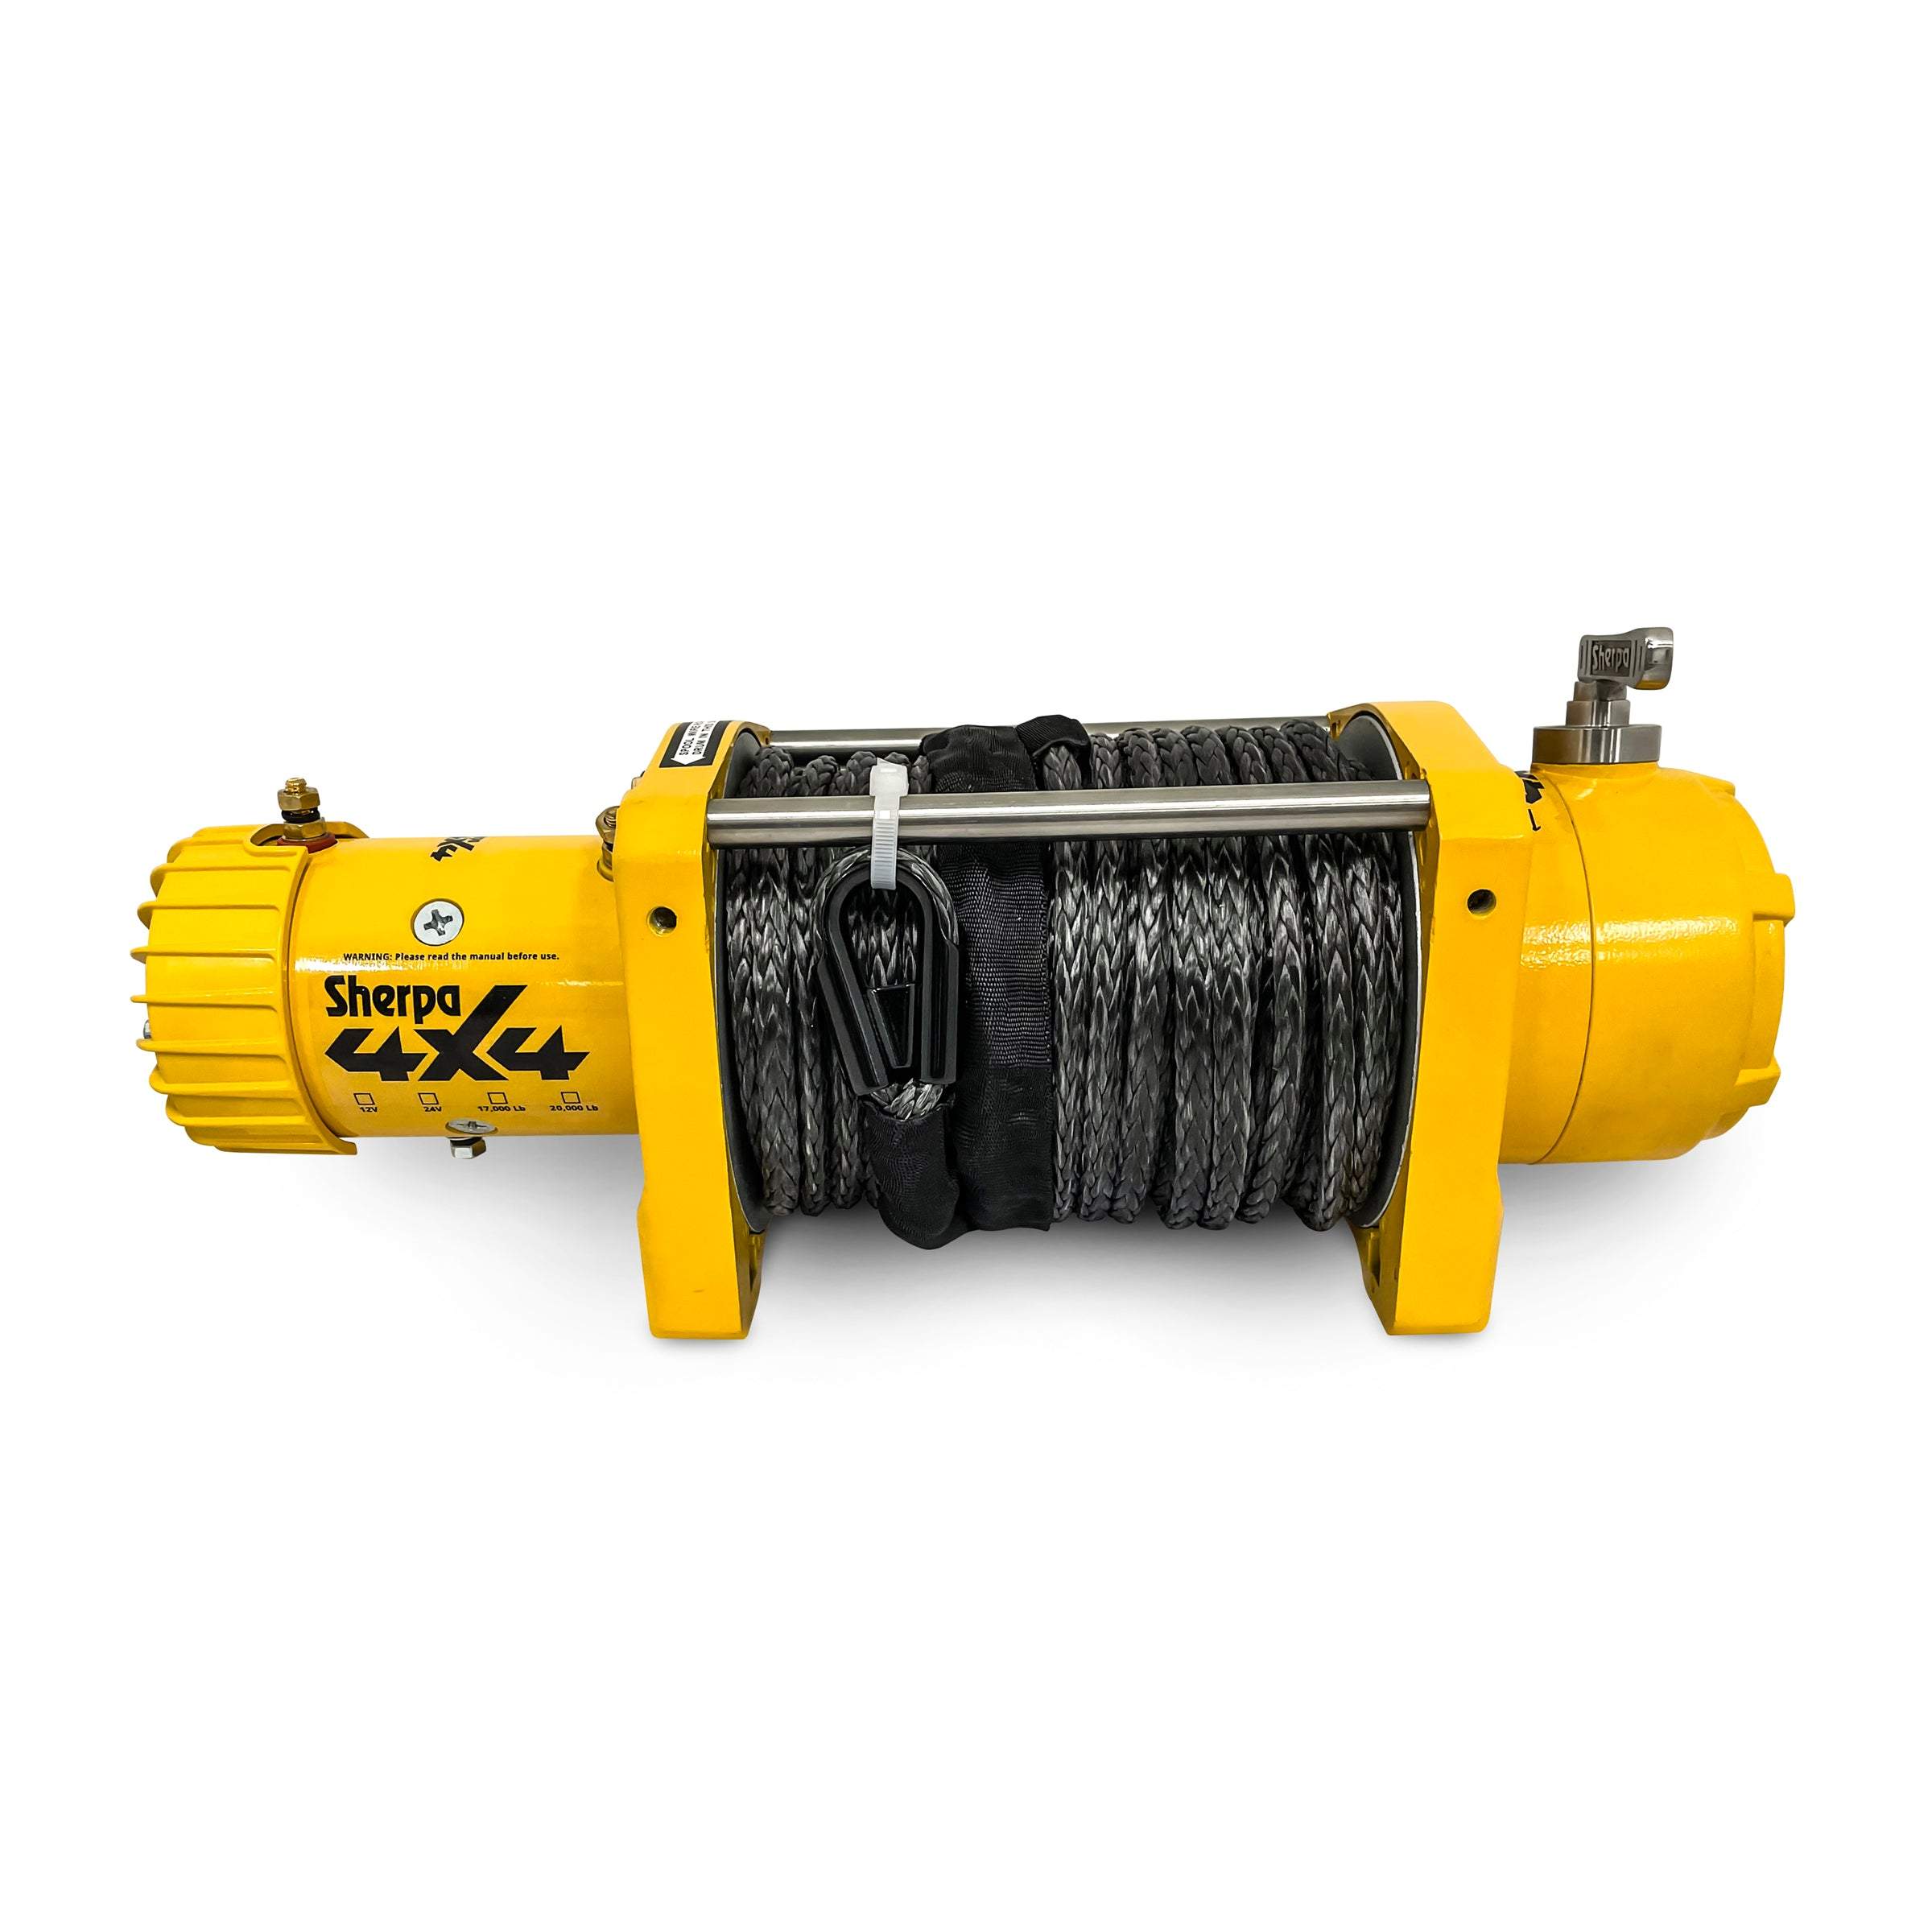 'The Steed' - 17000Lb Winch